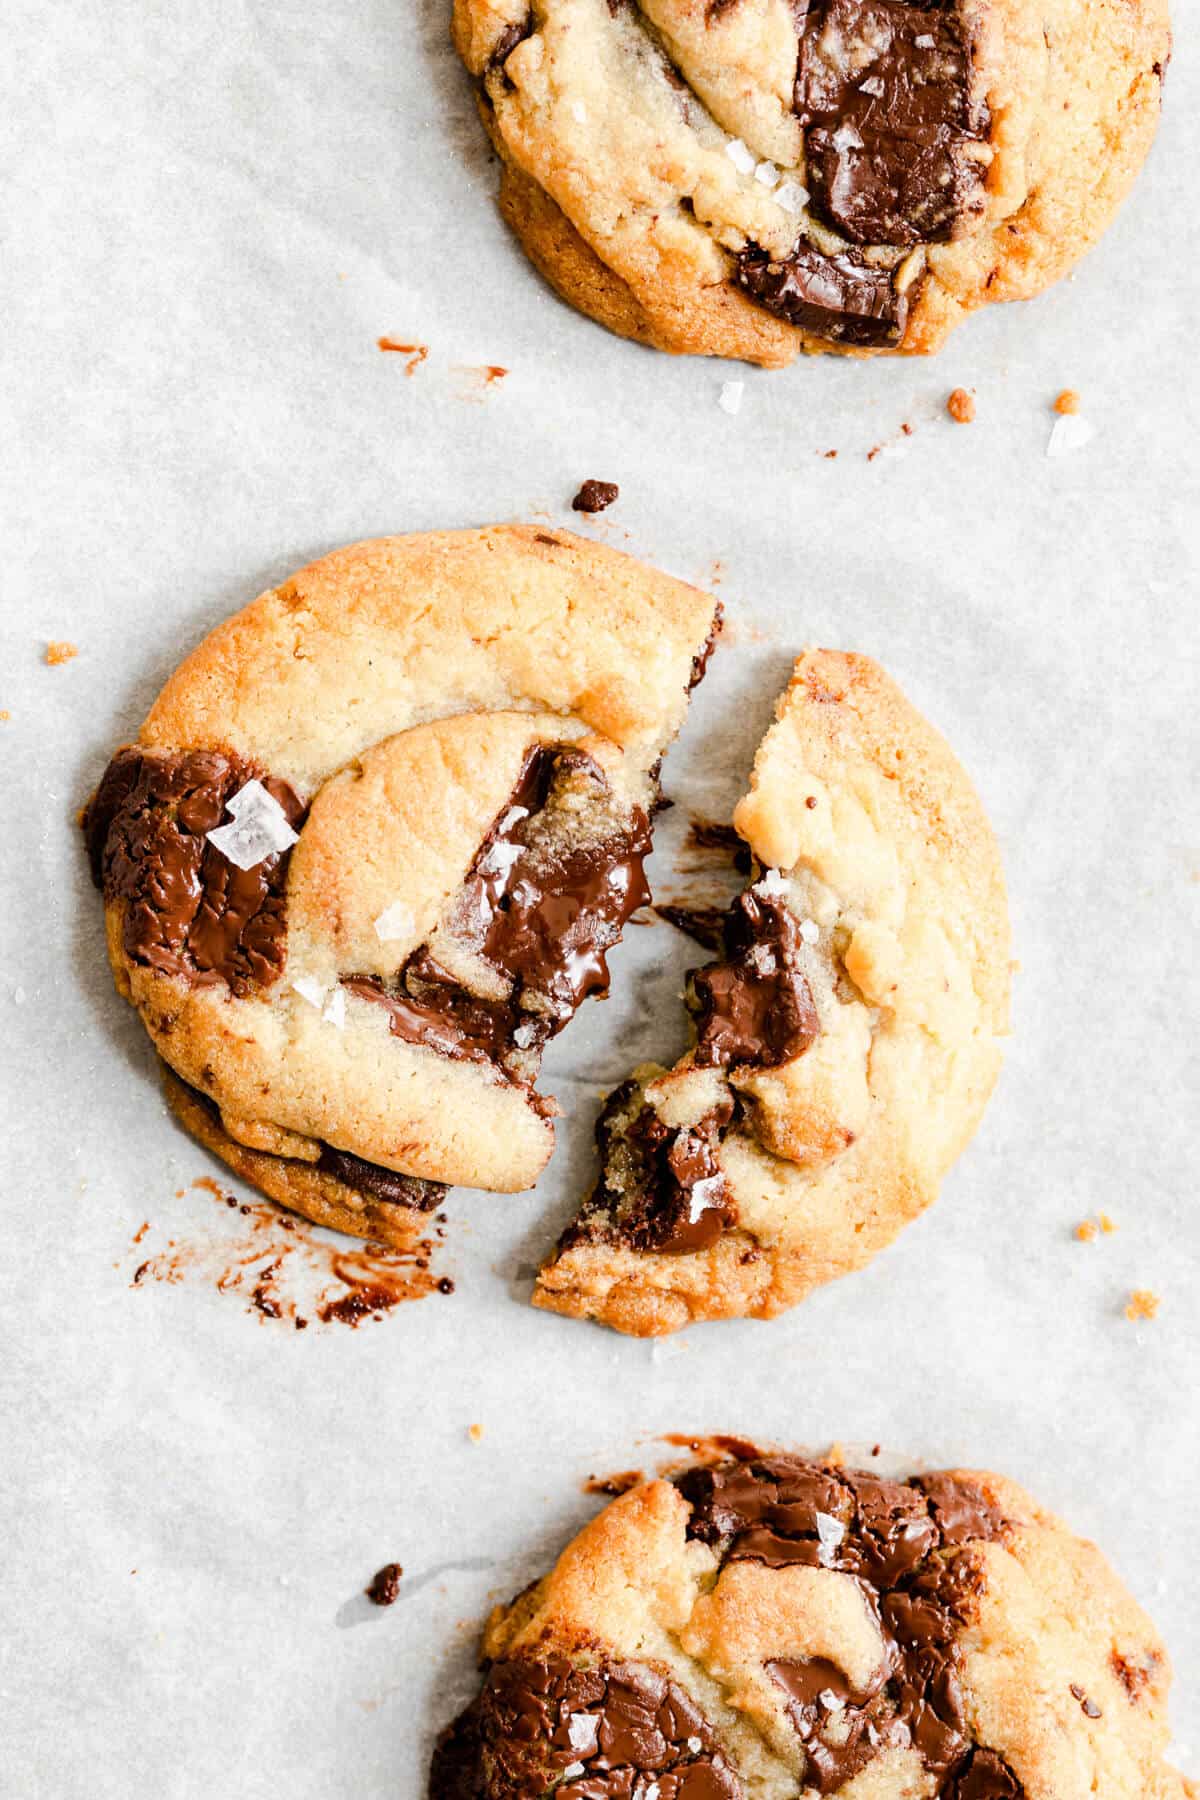 close up of a chocolate chip cookie broken in half revealing melted chocolate inside